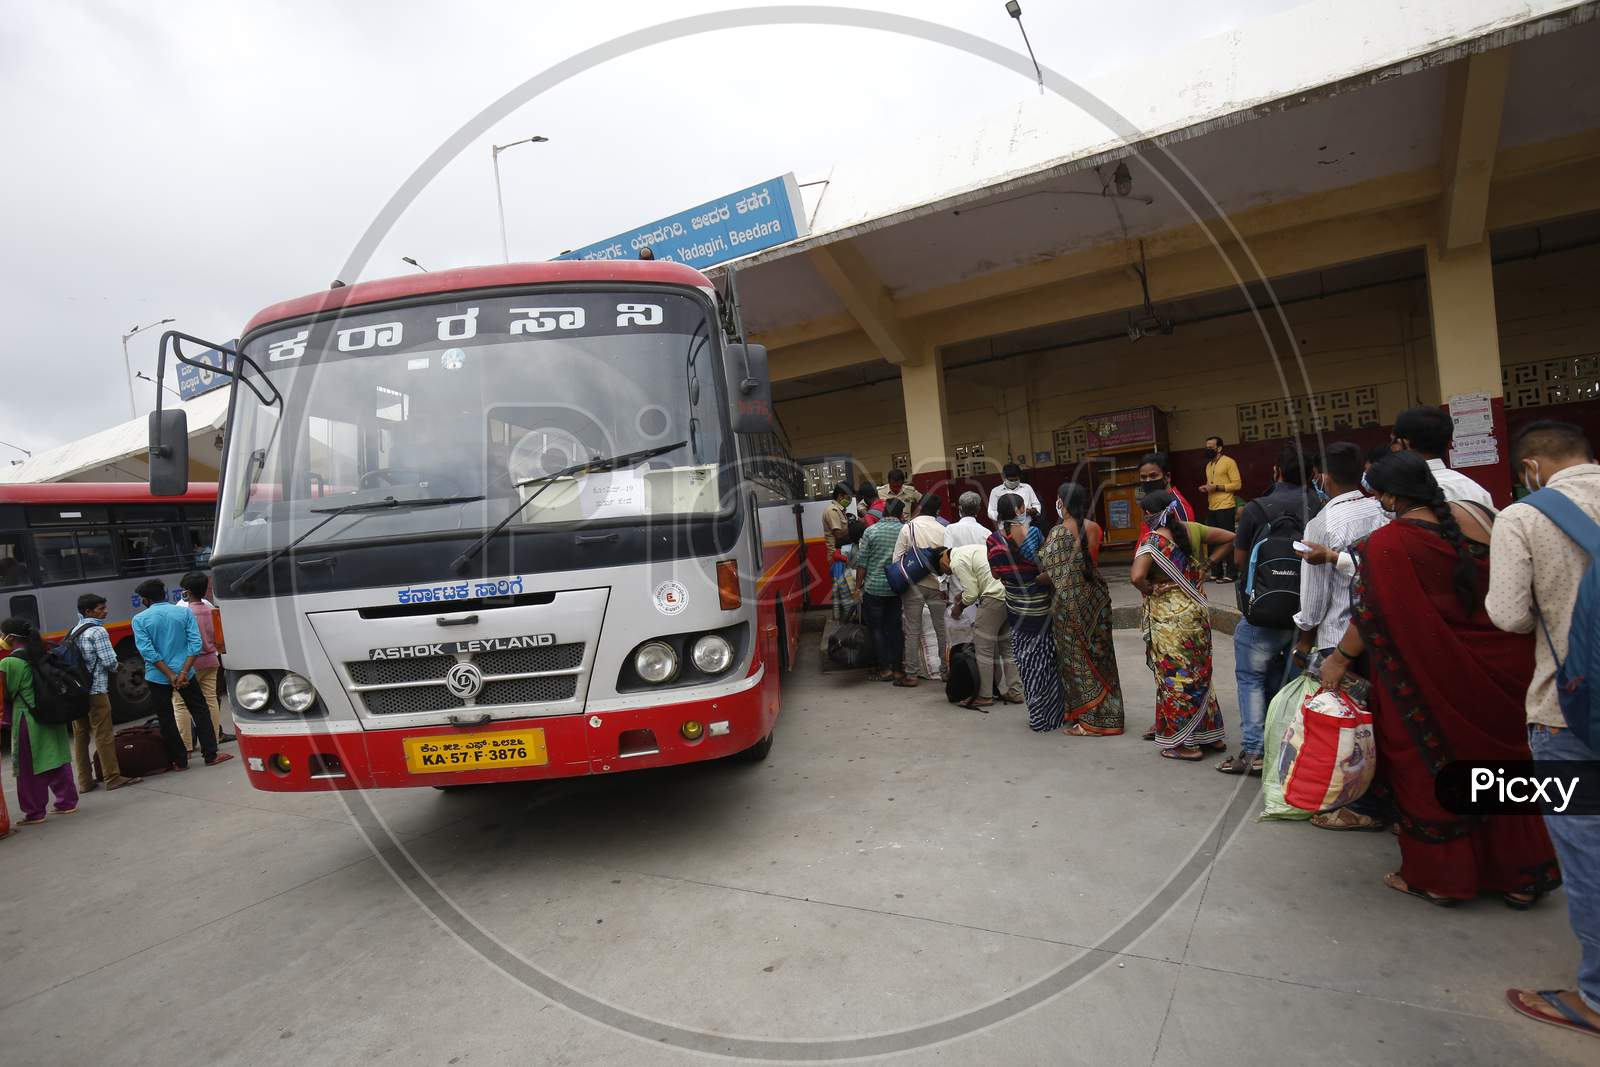 People board public transport buses in a bus station after the state eased lockdown norms during the nationwide lockdown to prevent the spread of coronavirus (COVID-19) in Bangalore, India.